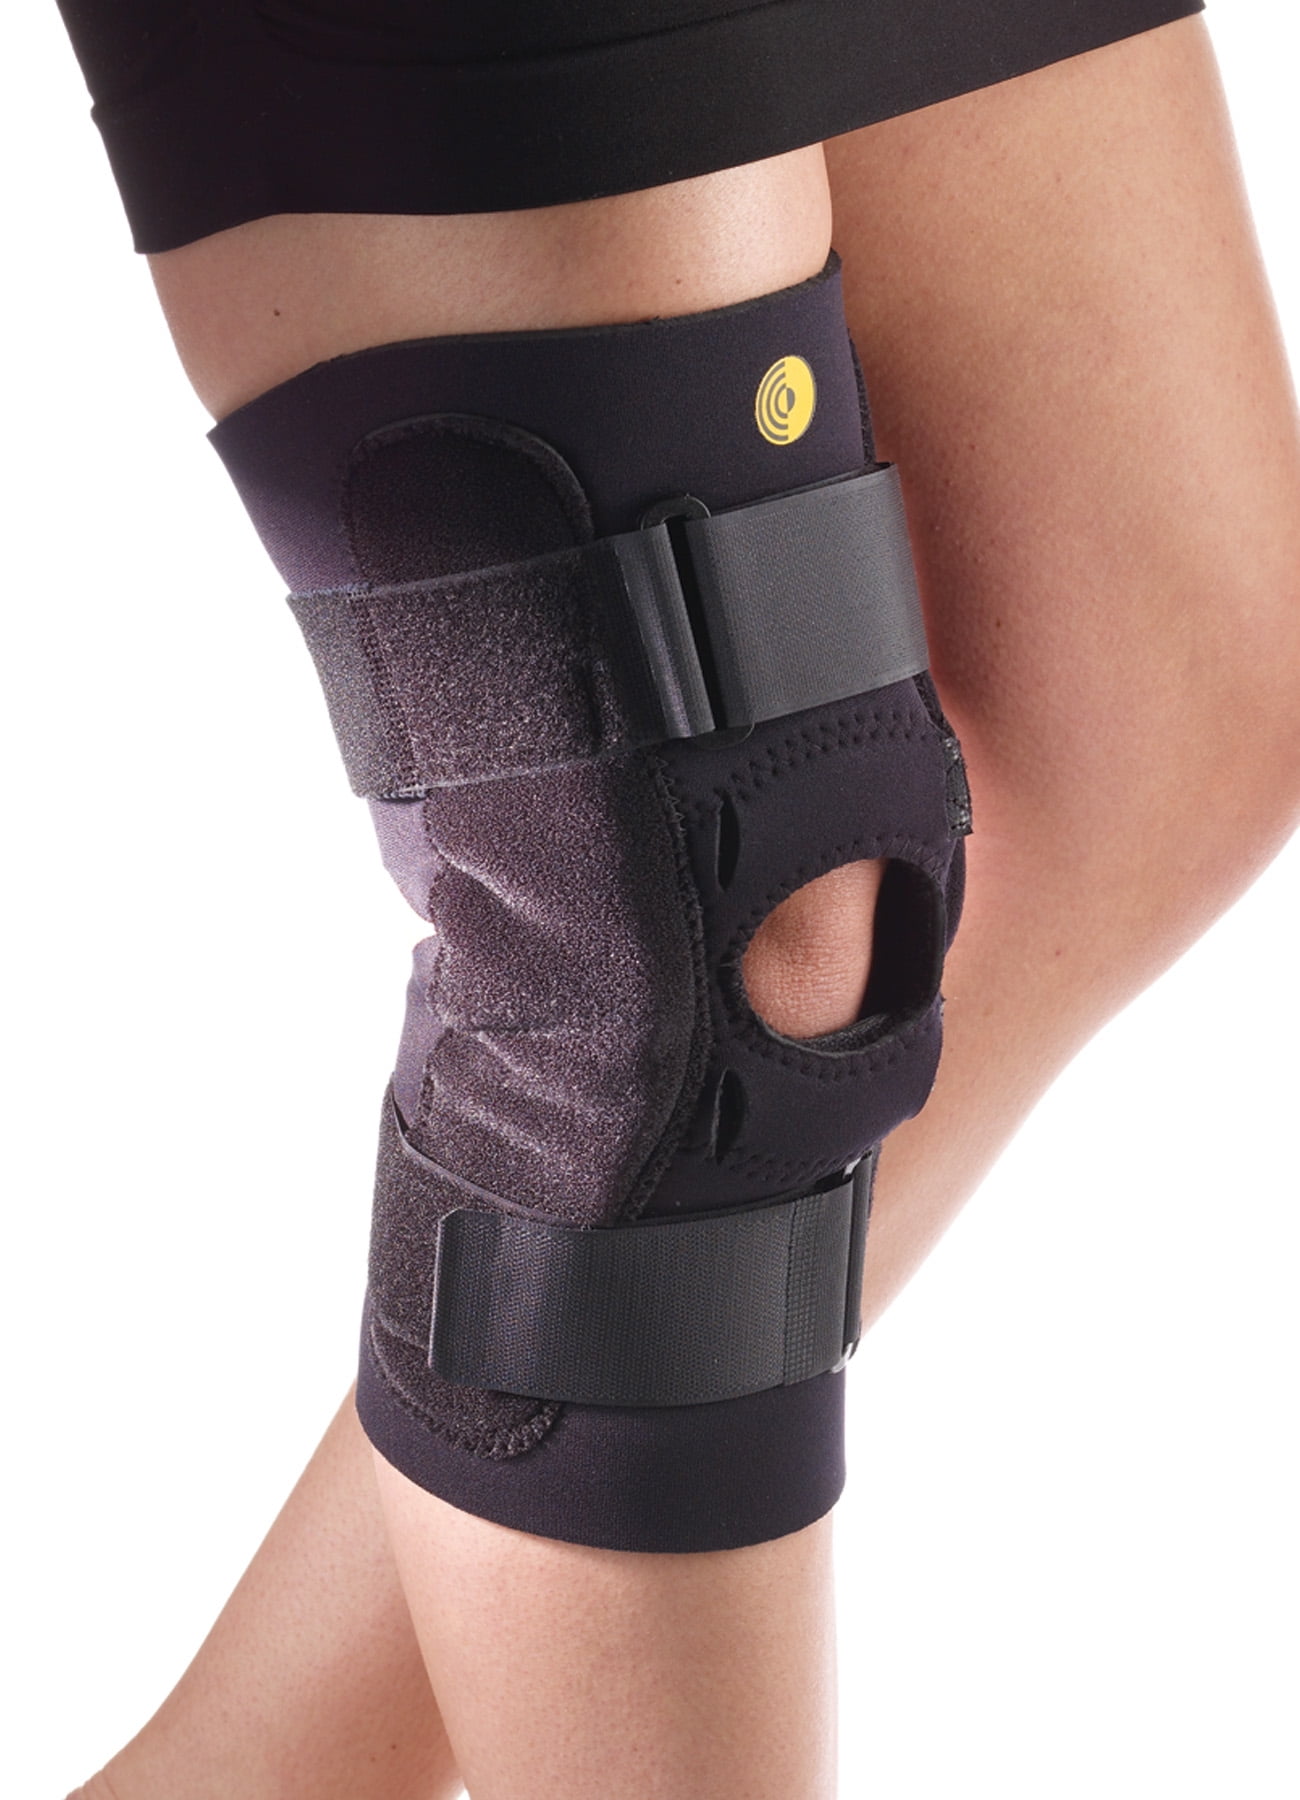 Mgaxyff Hip Brace Groin Support Thigh Compression Sleeve Hip